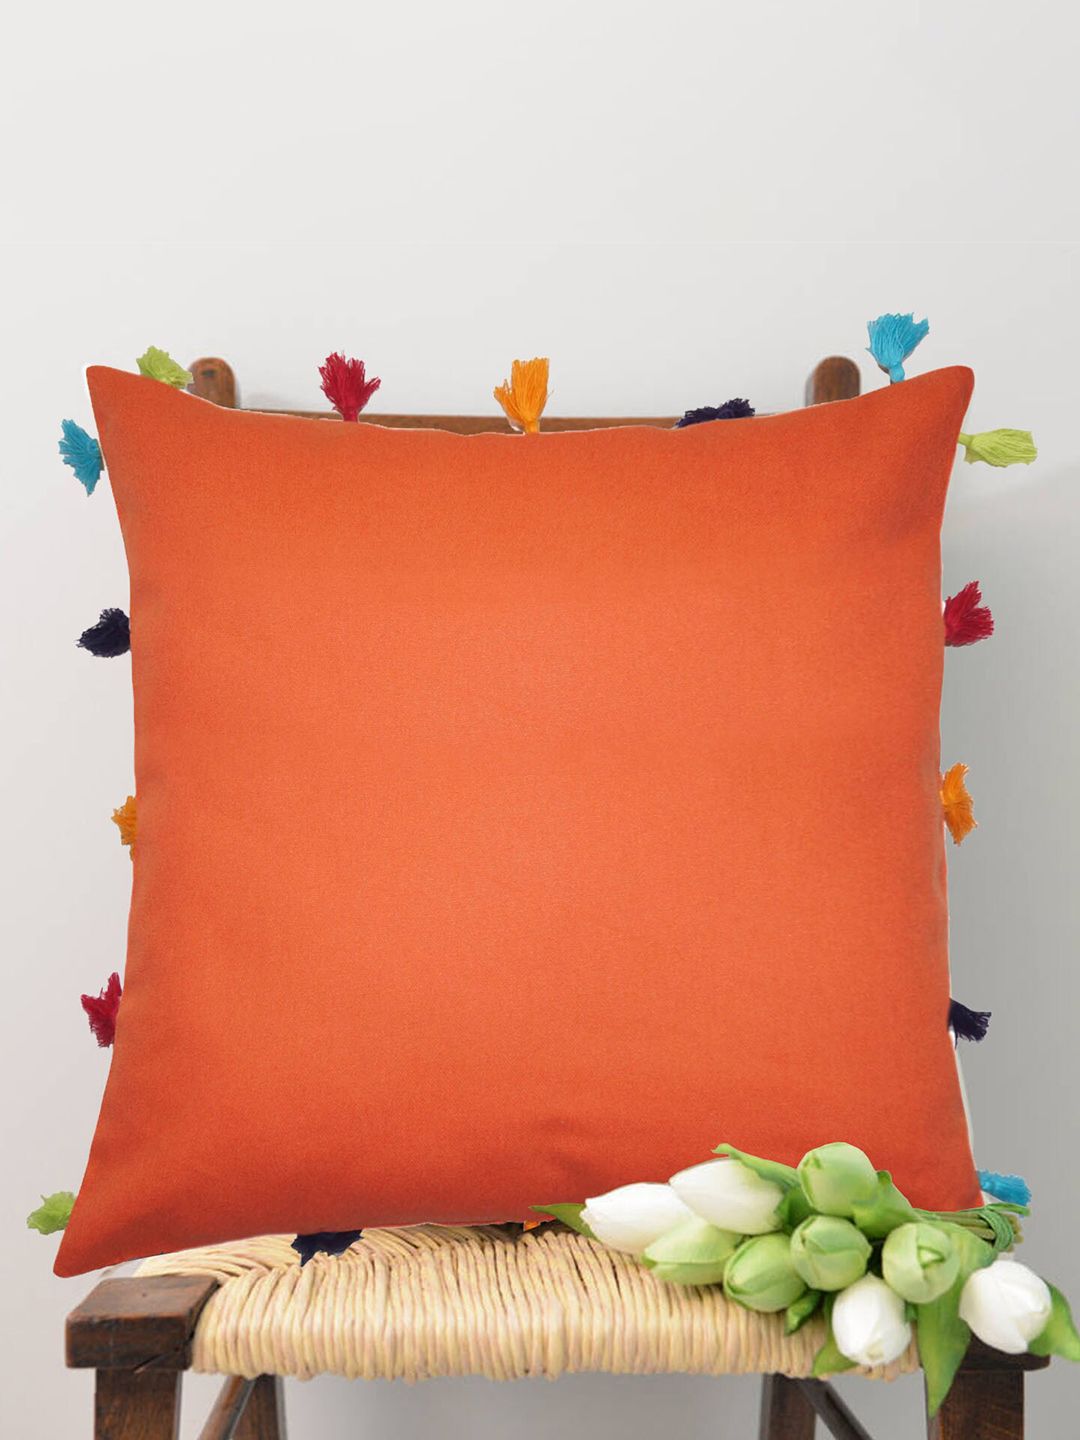 Lushomes Orange Set of 3 Square Cushion Covers Price in India